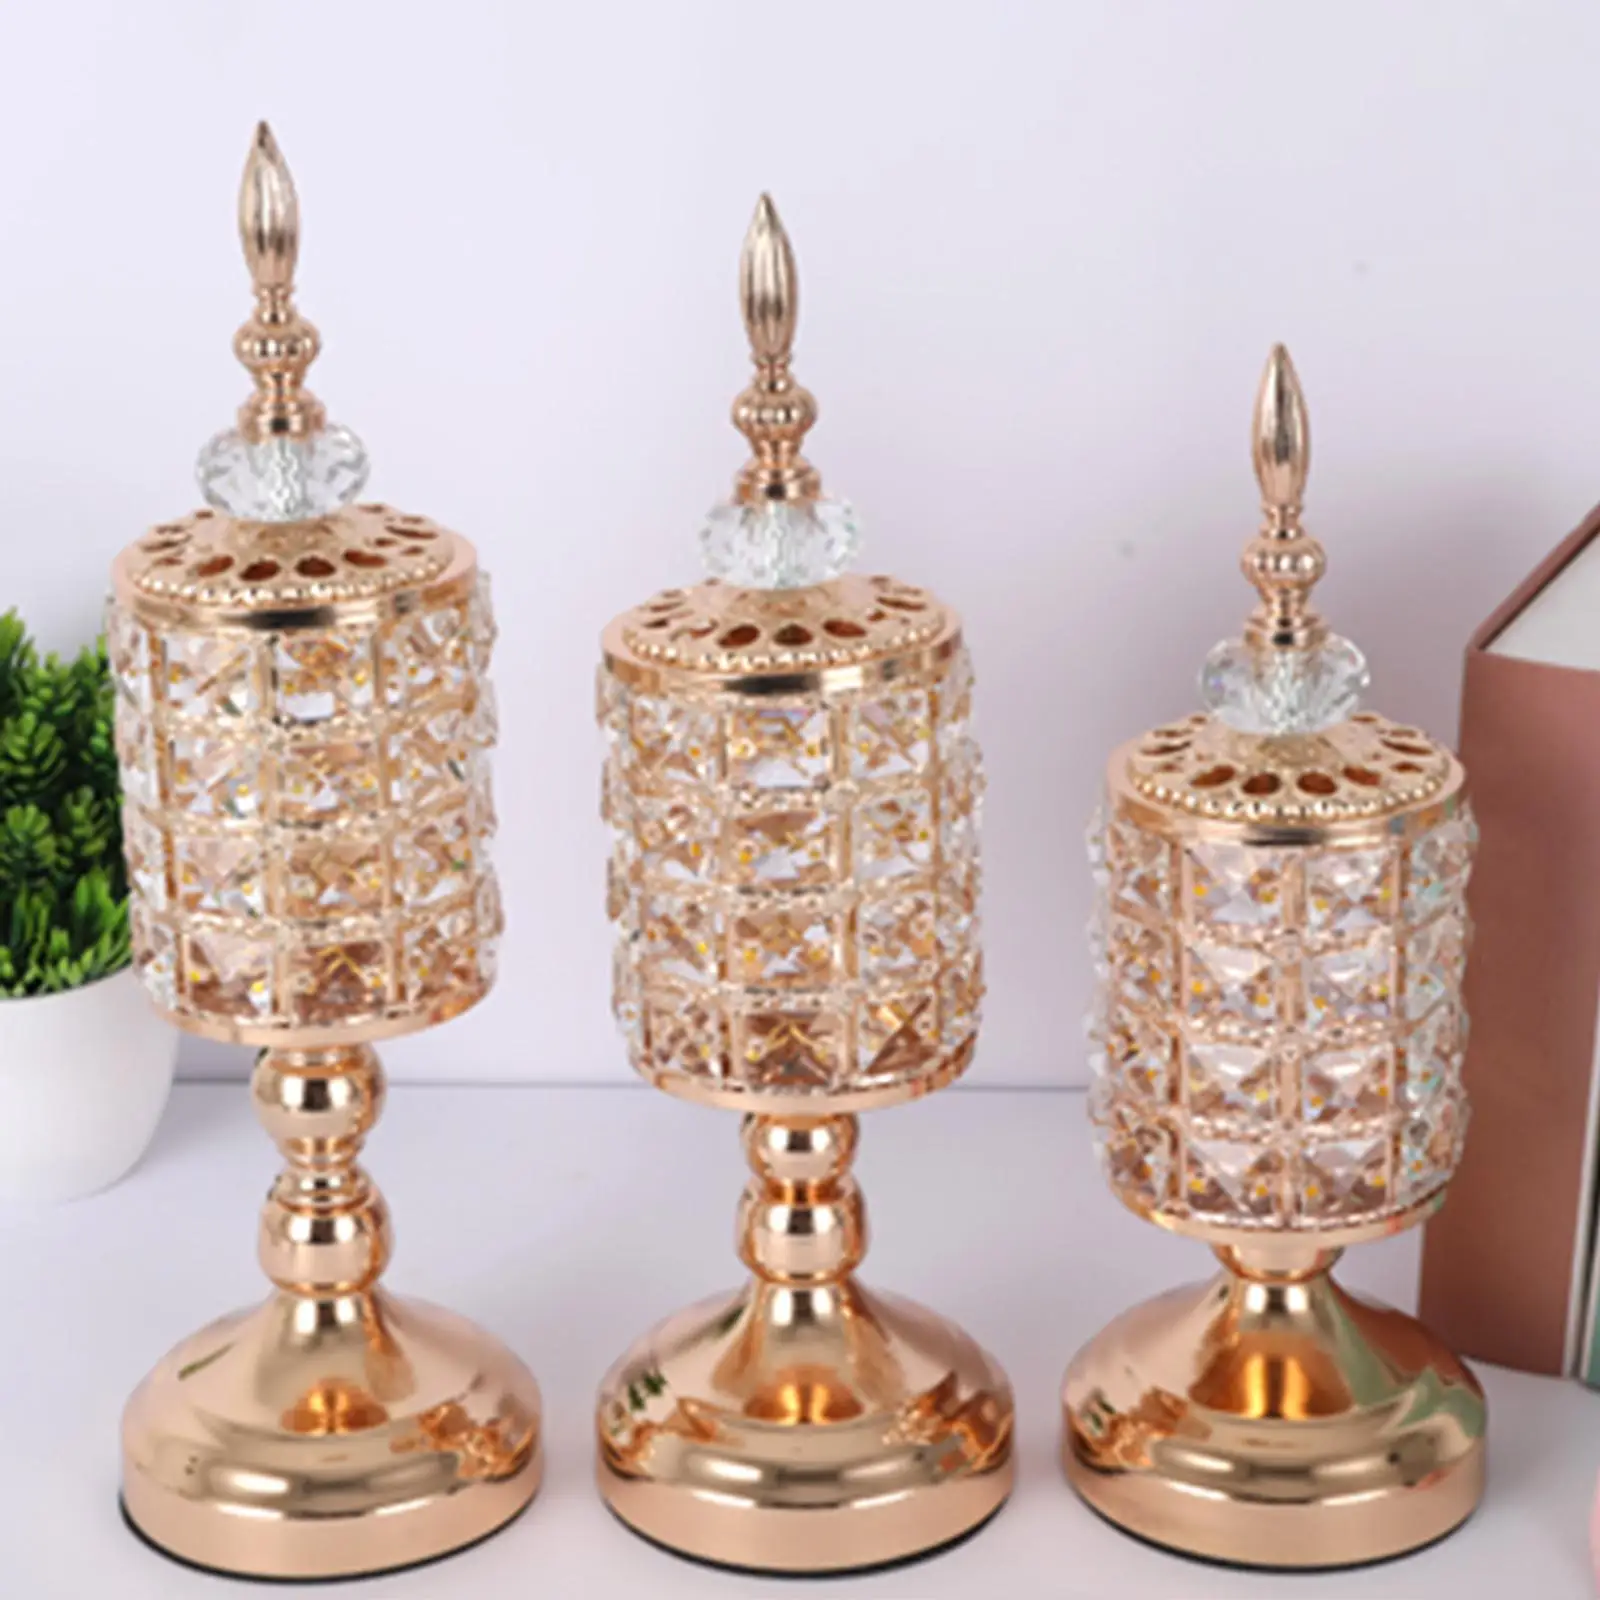 Decorative Crystal Candle Holder Romantic Luxury Elegant for Thanksgiving